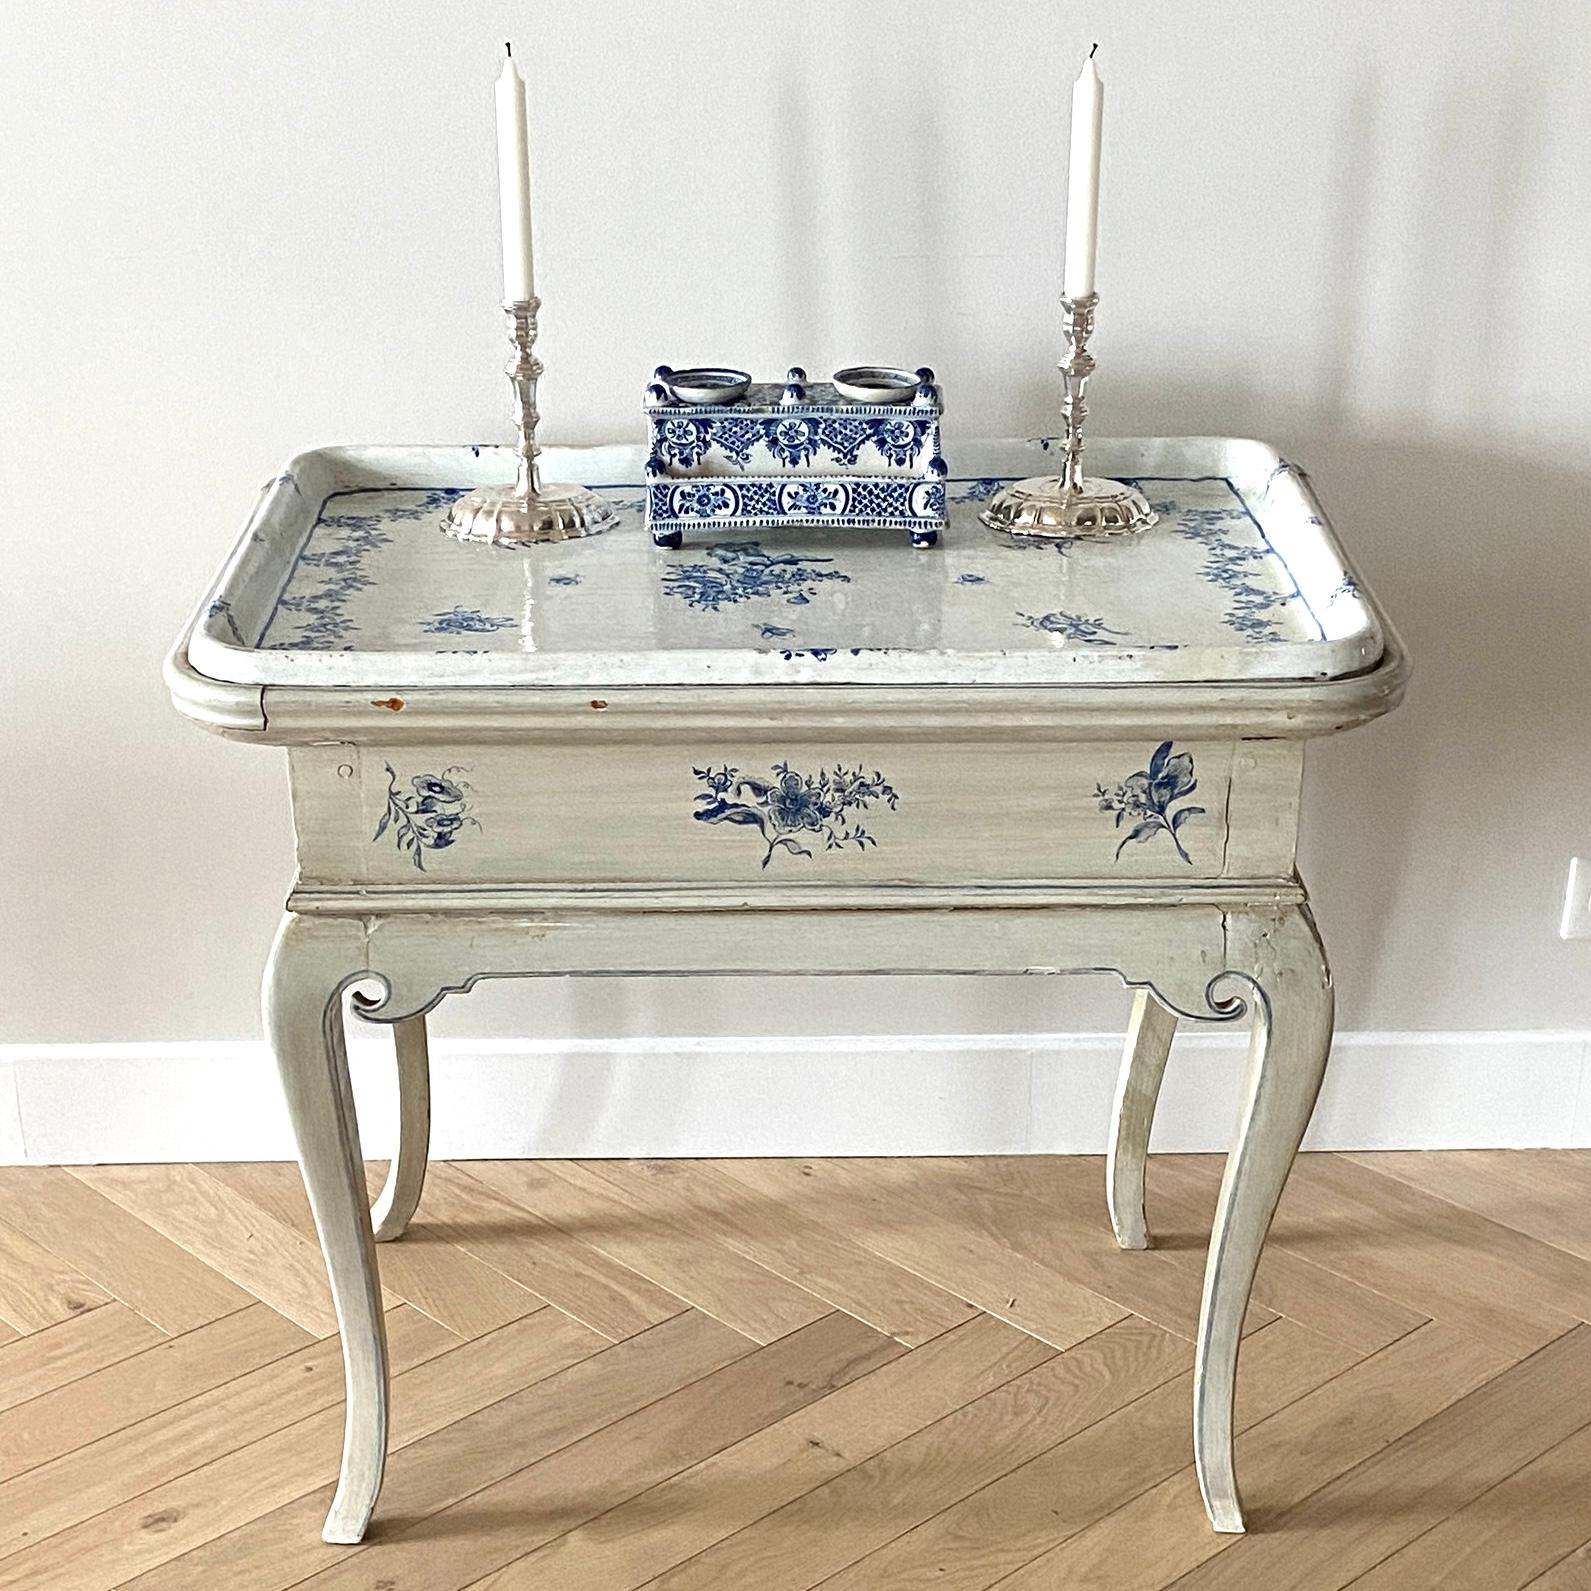 Danish 18th Century Blue Faience Inkwell by Store Kongensgade In Good Condition For Sale In Haddonfield, NJ